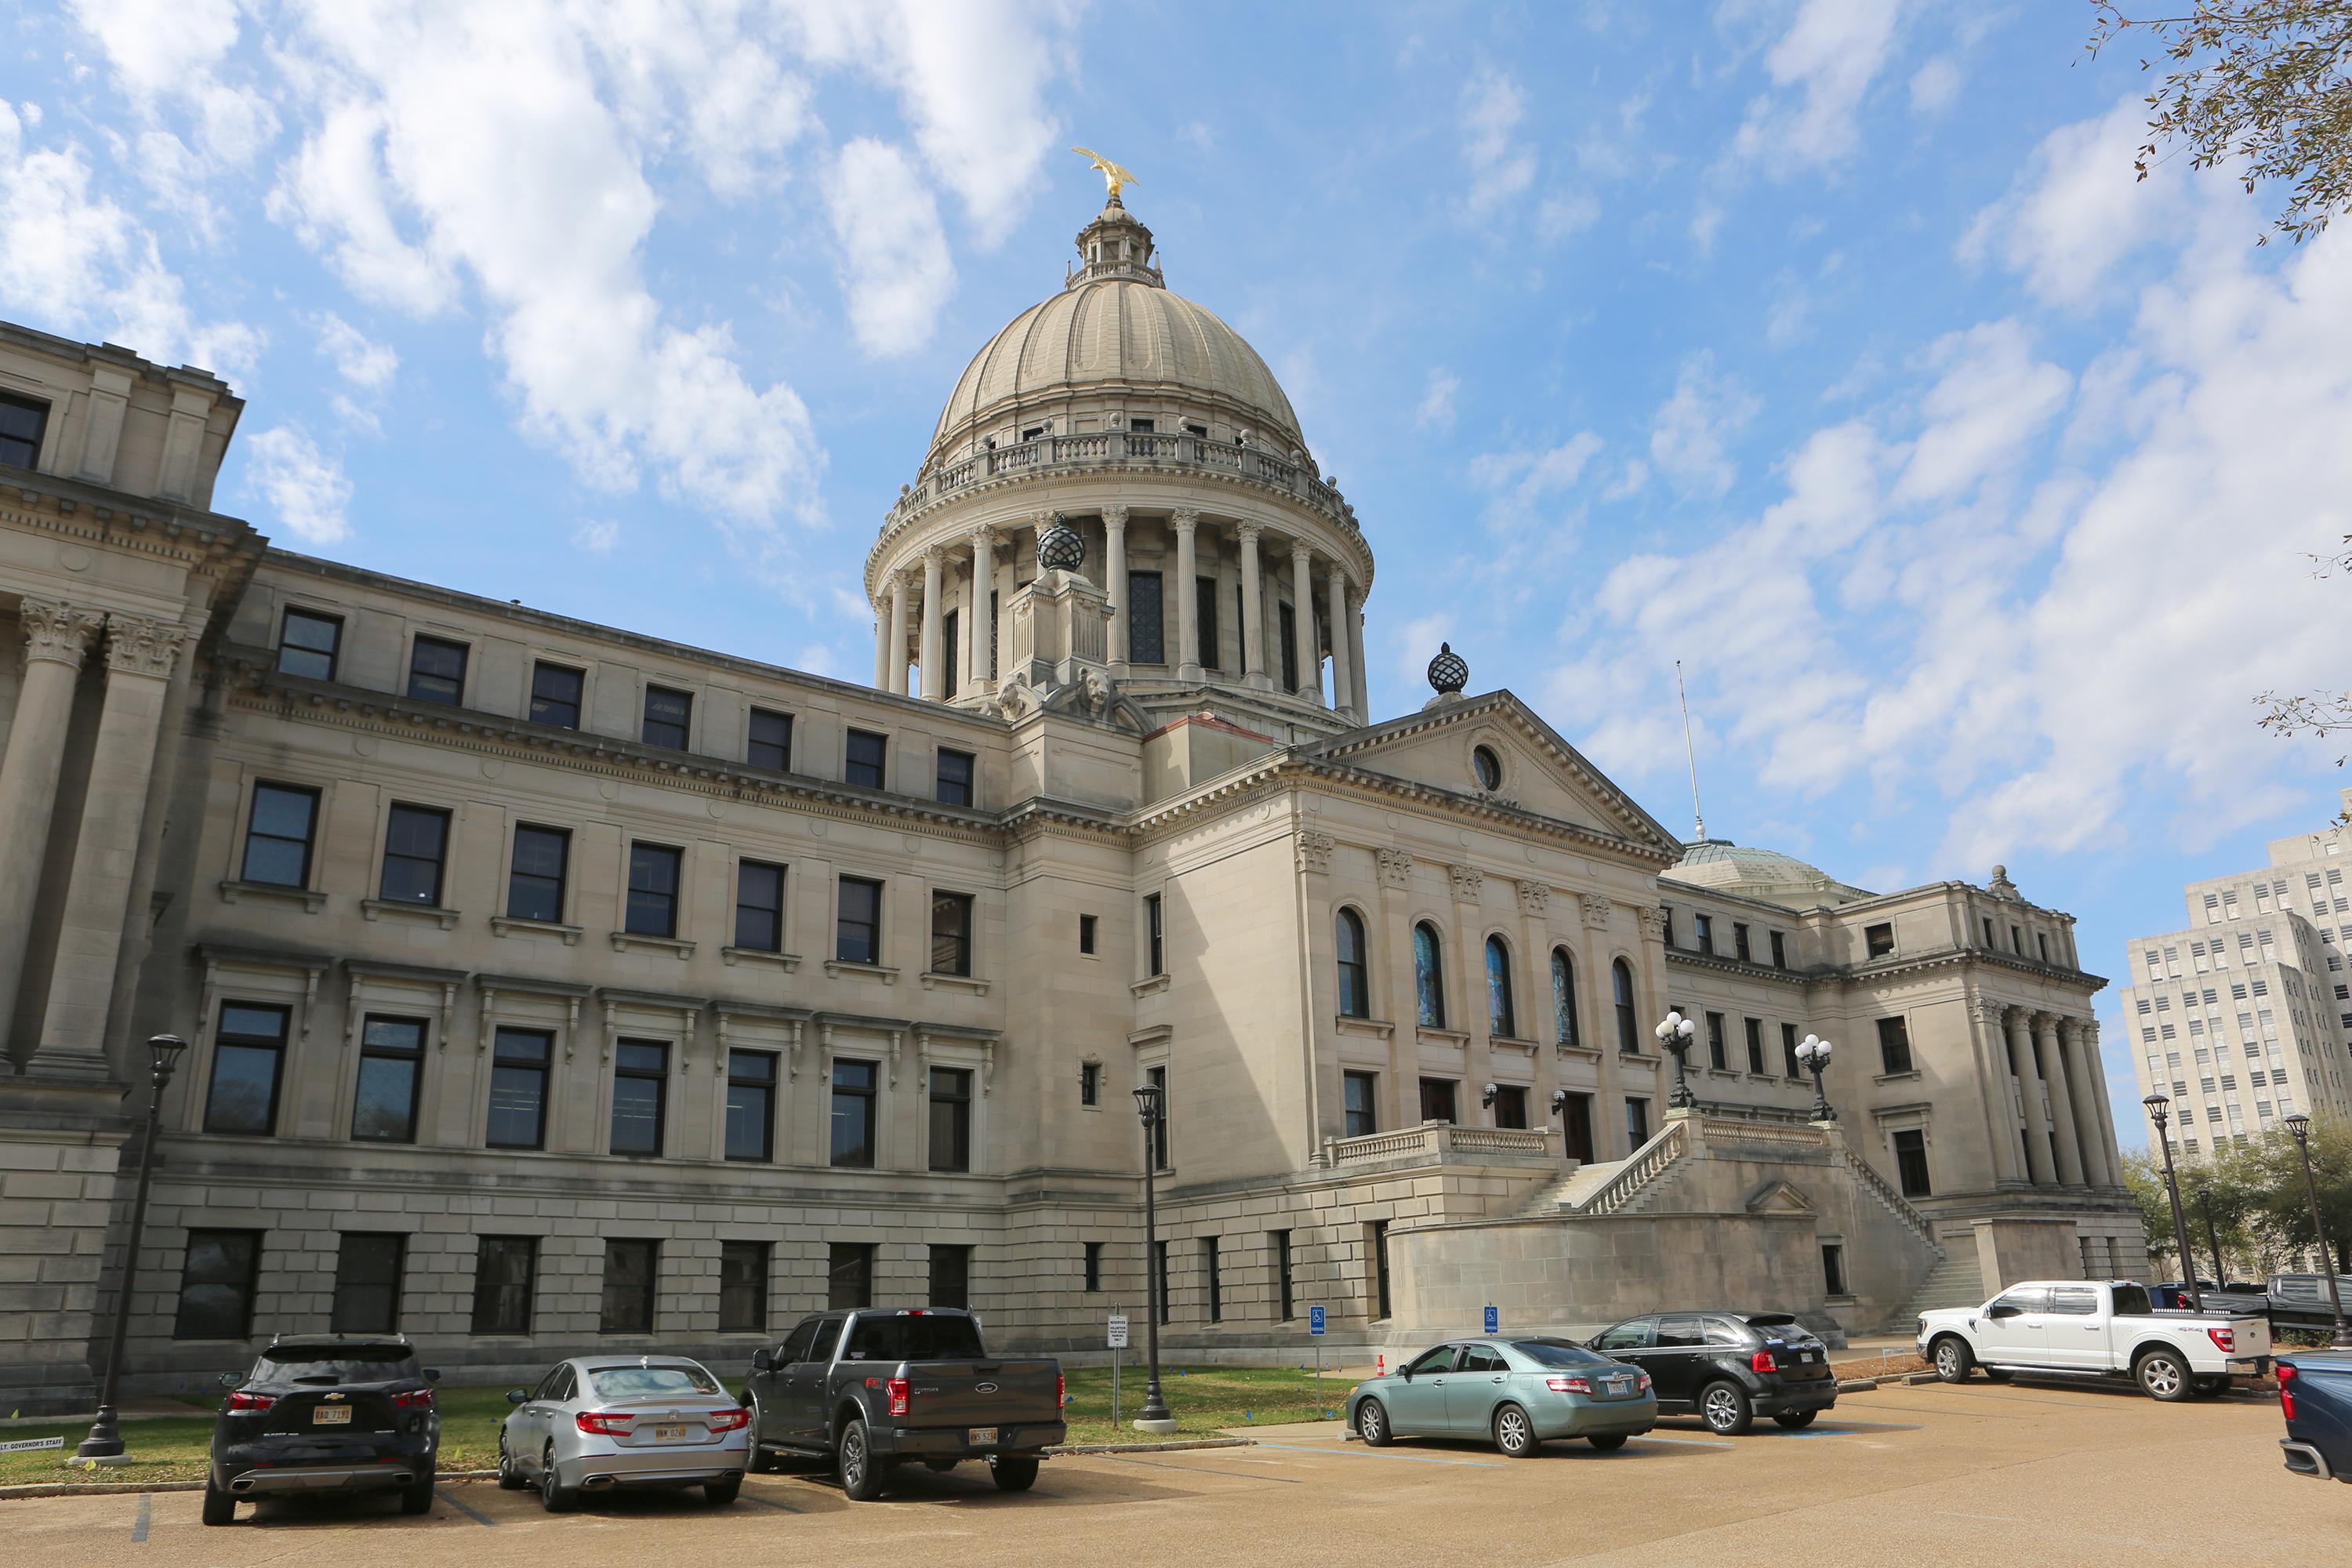 The Mississippi State Capitol, with cars parked out front